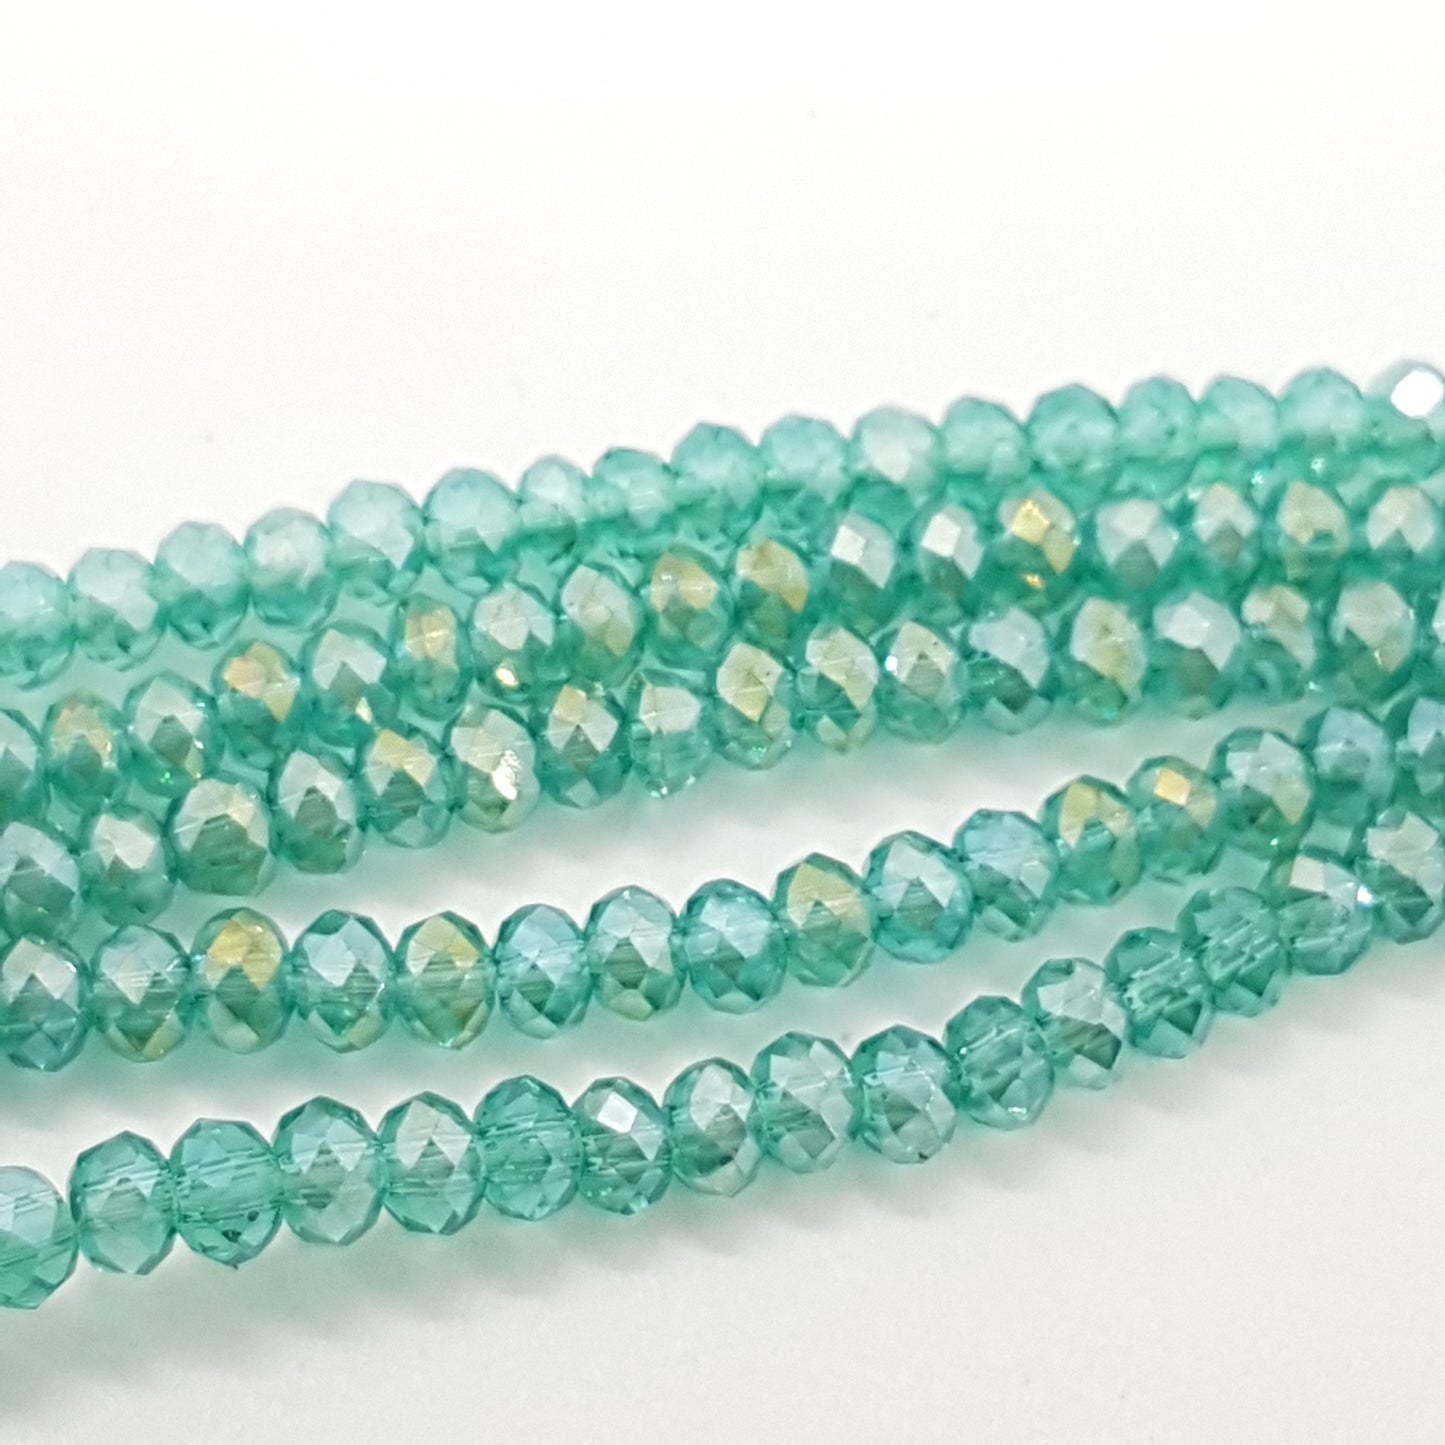 150pc Teal Crystal Rondelle Beads